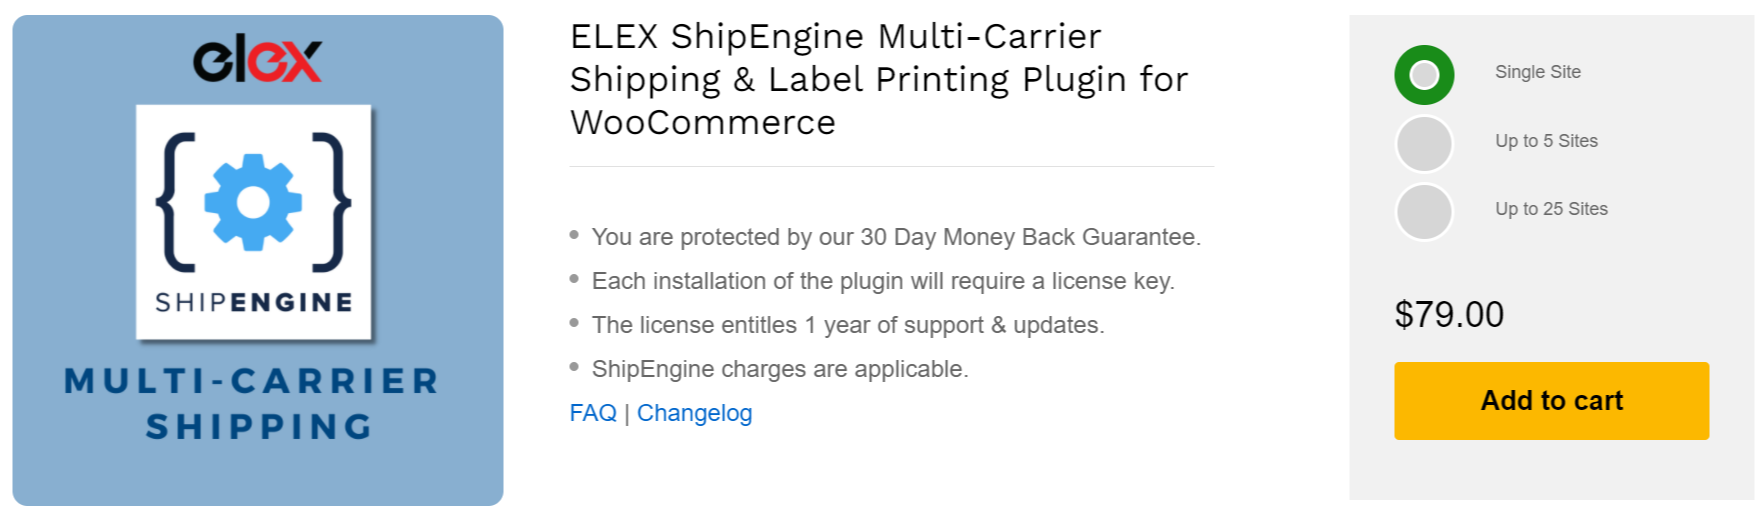 ELEX ShipEngine Multi-Carrier Shipping & Label Printing Plugin for WooCommerce